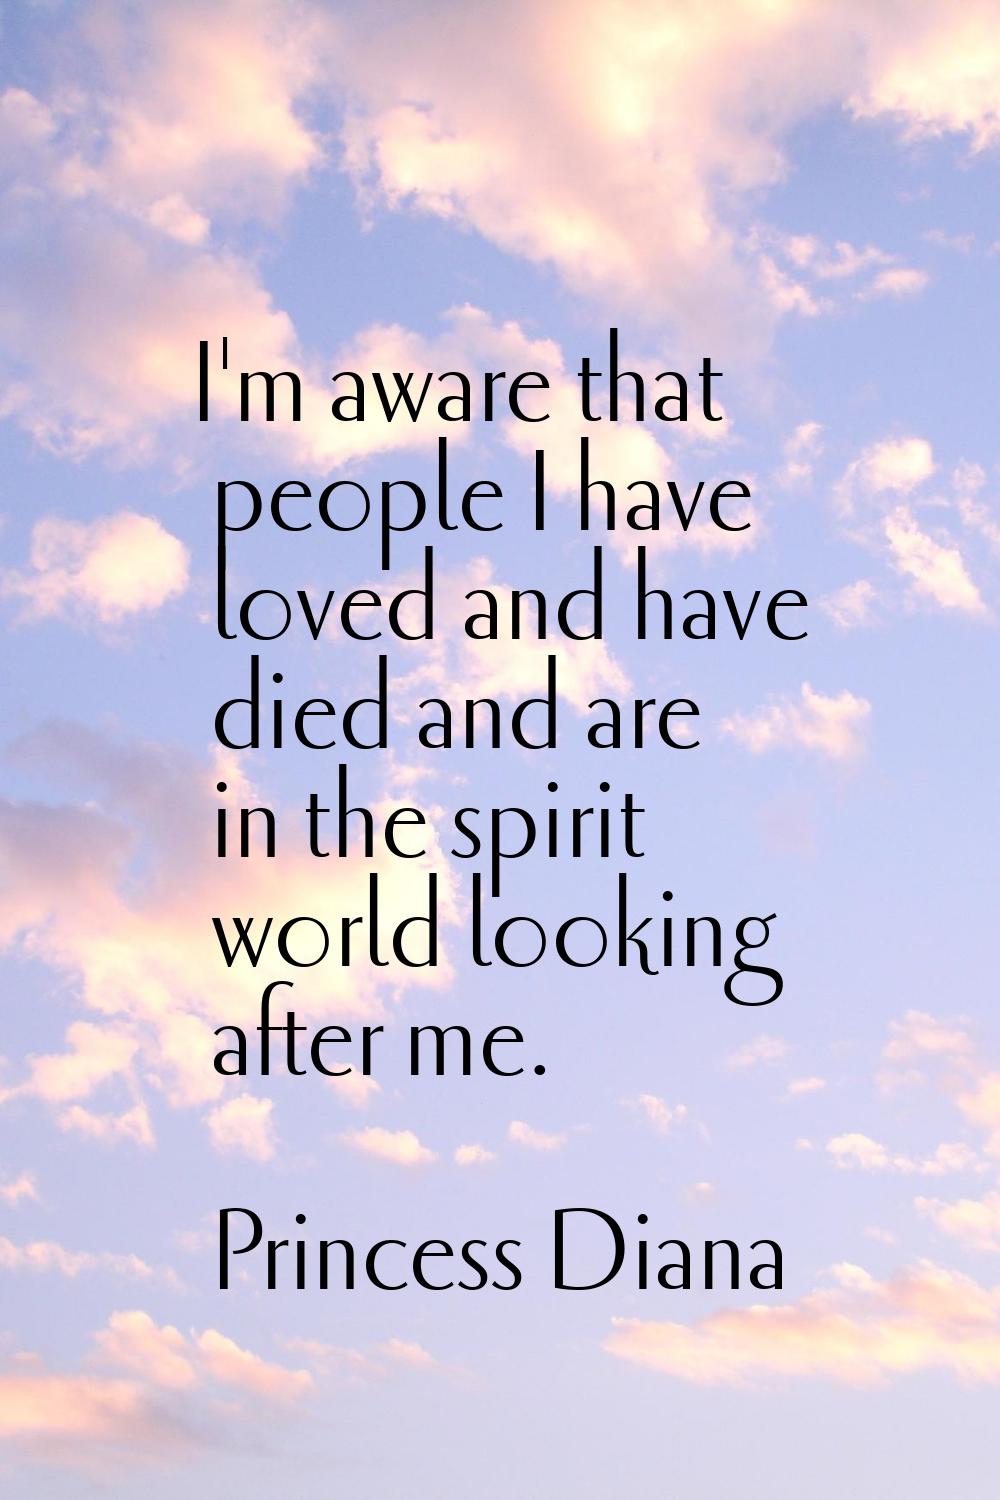 I'm aware that people I have loved and have died and are in the spirit world looking after me.